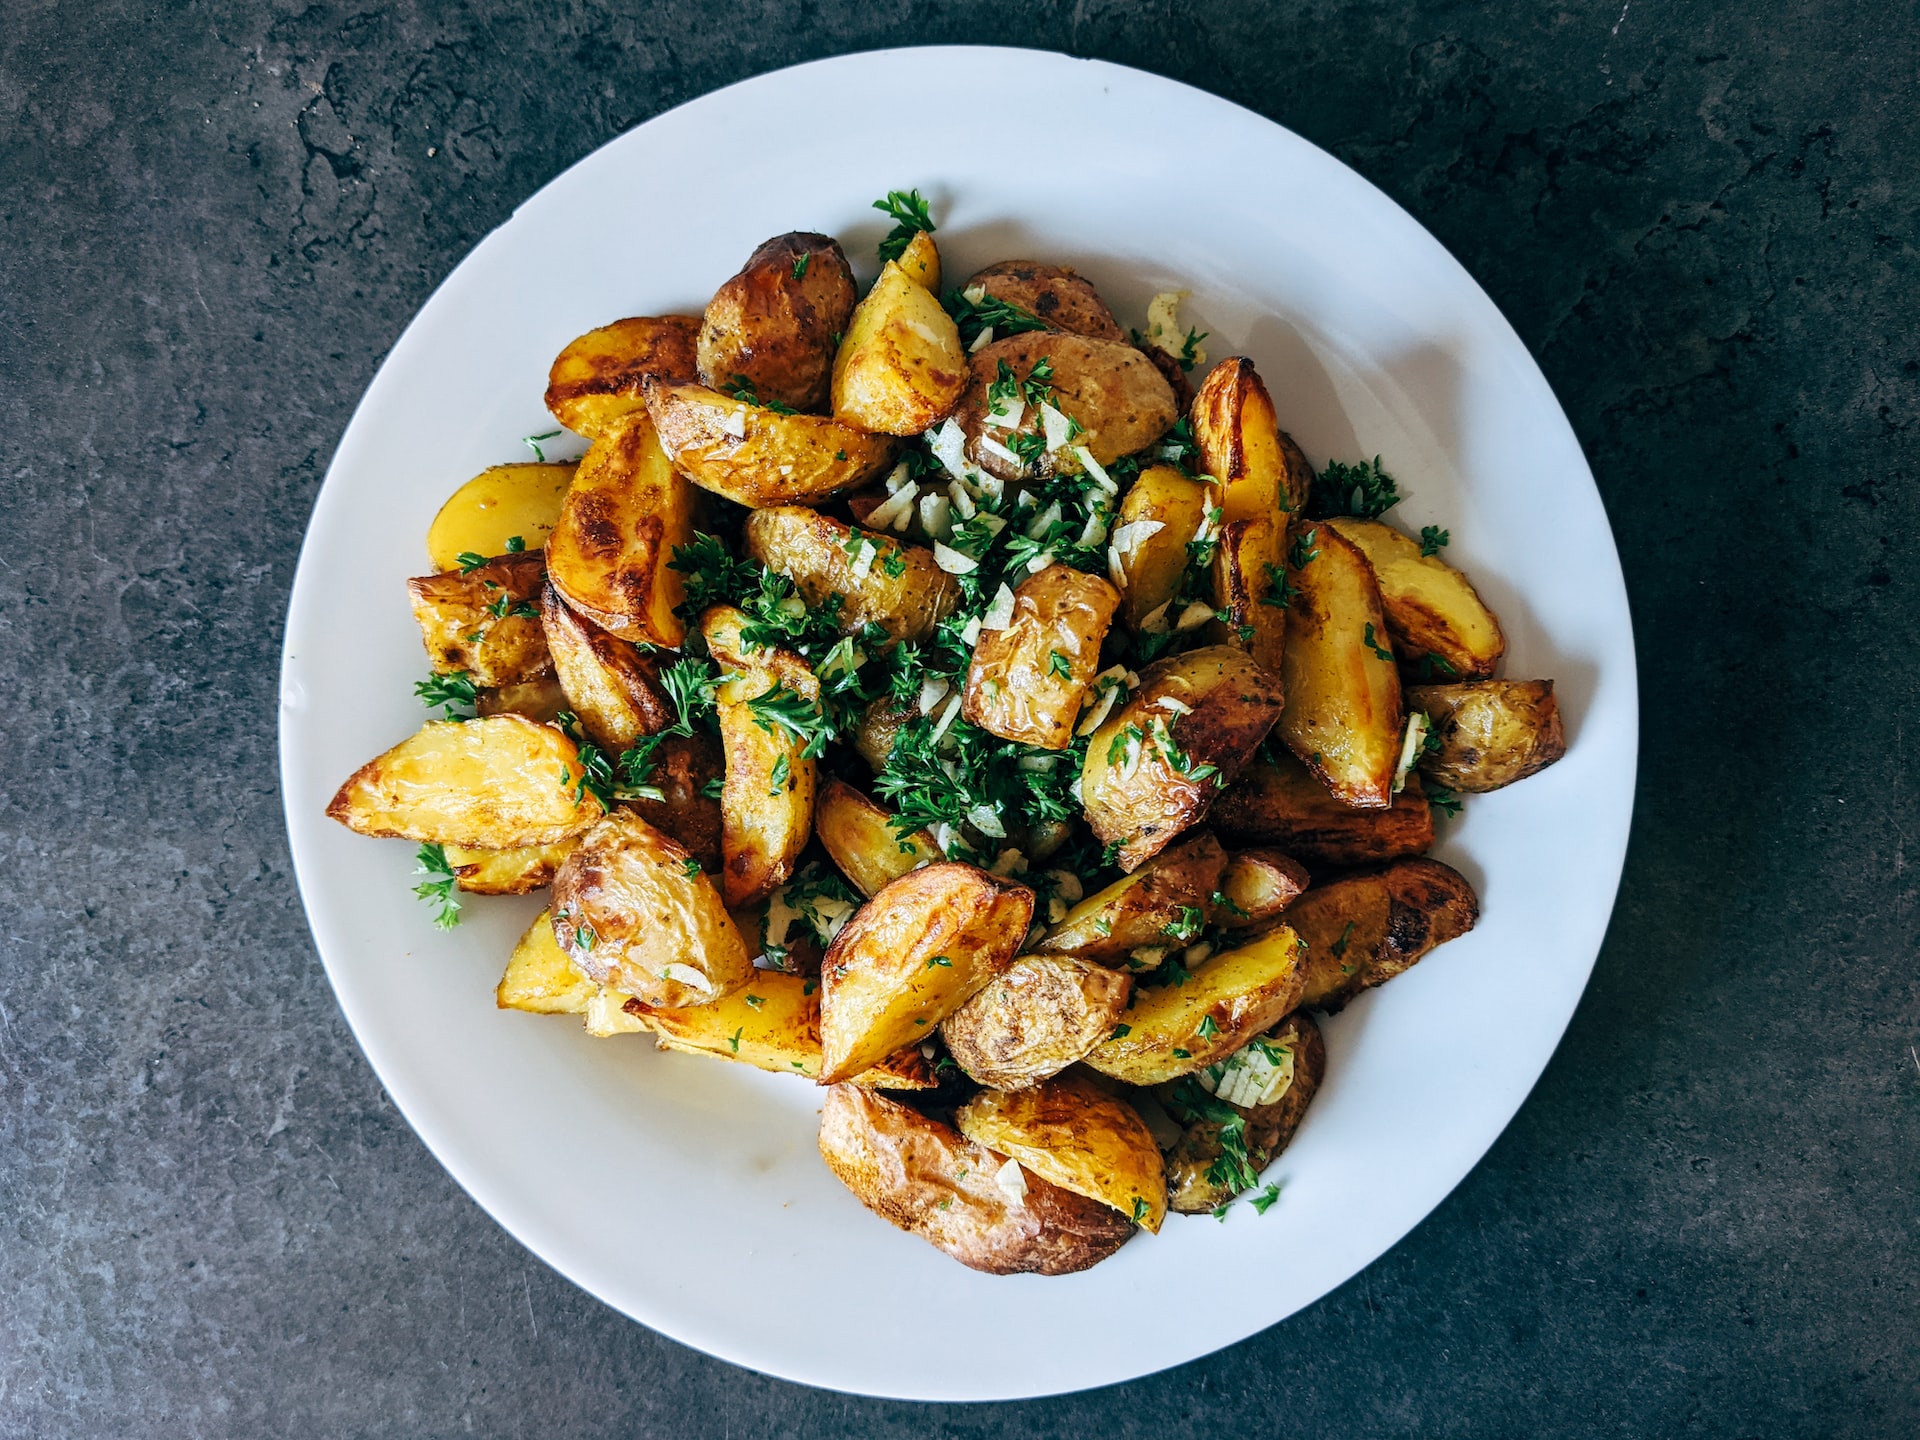 Double the Deliciousness: How Double Cooking Potatoes Can Help You Achieve Optimal Gut Health